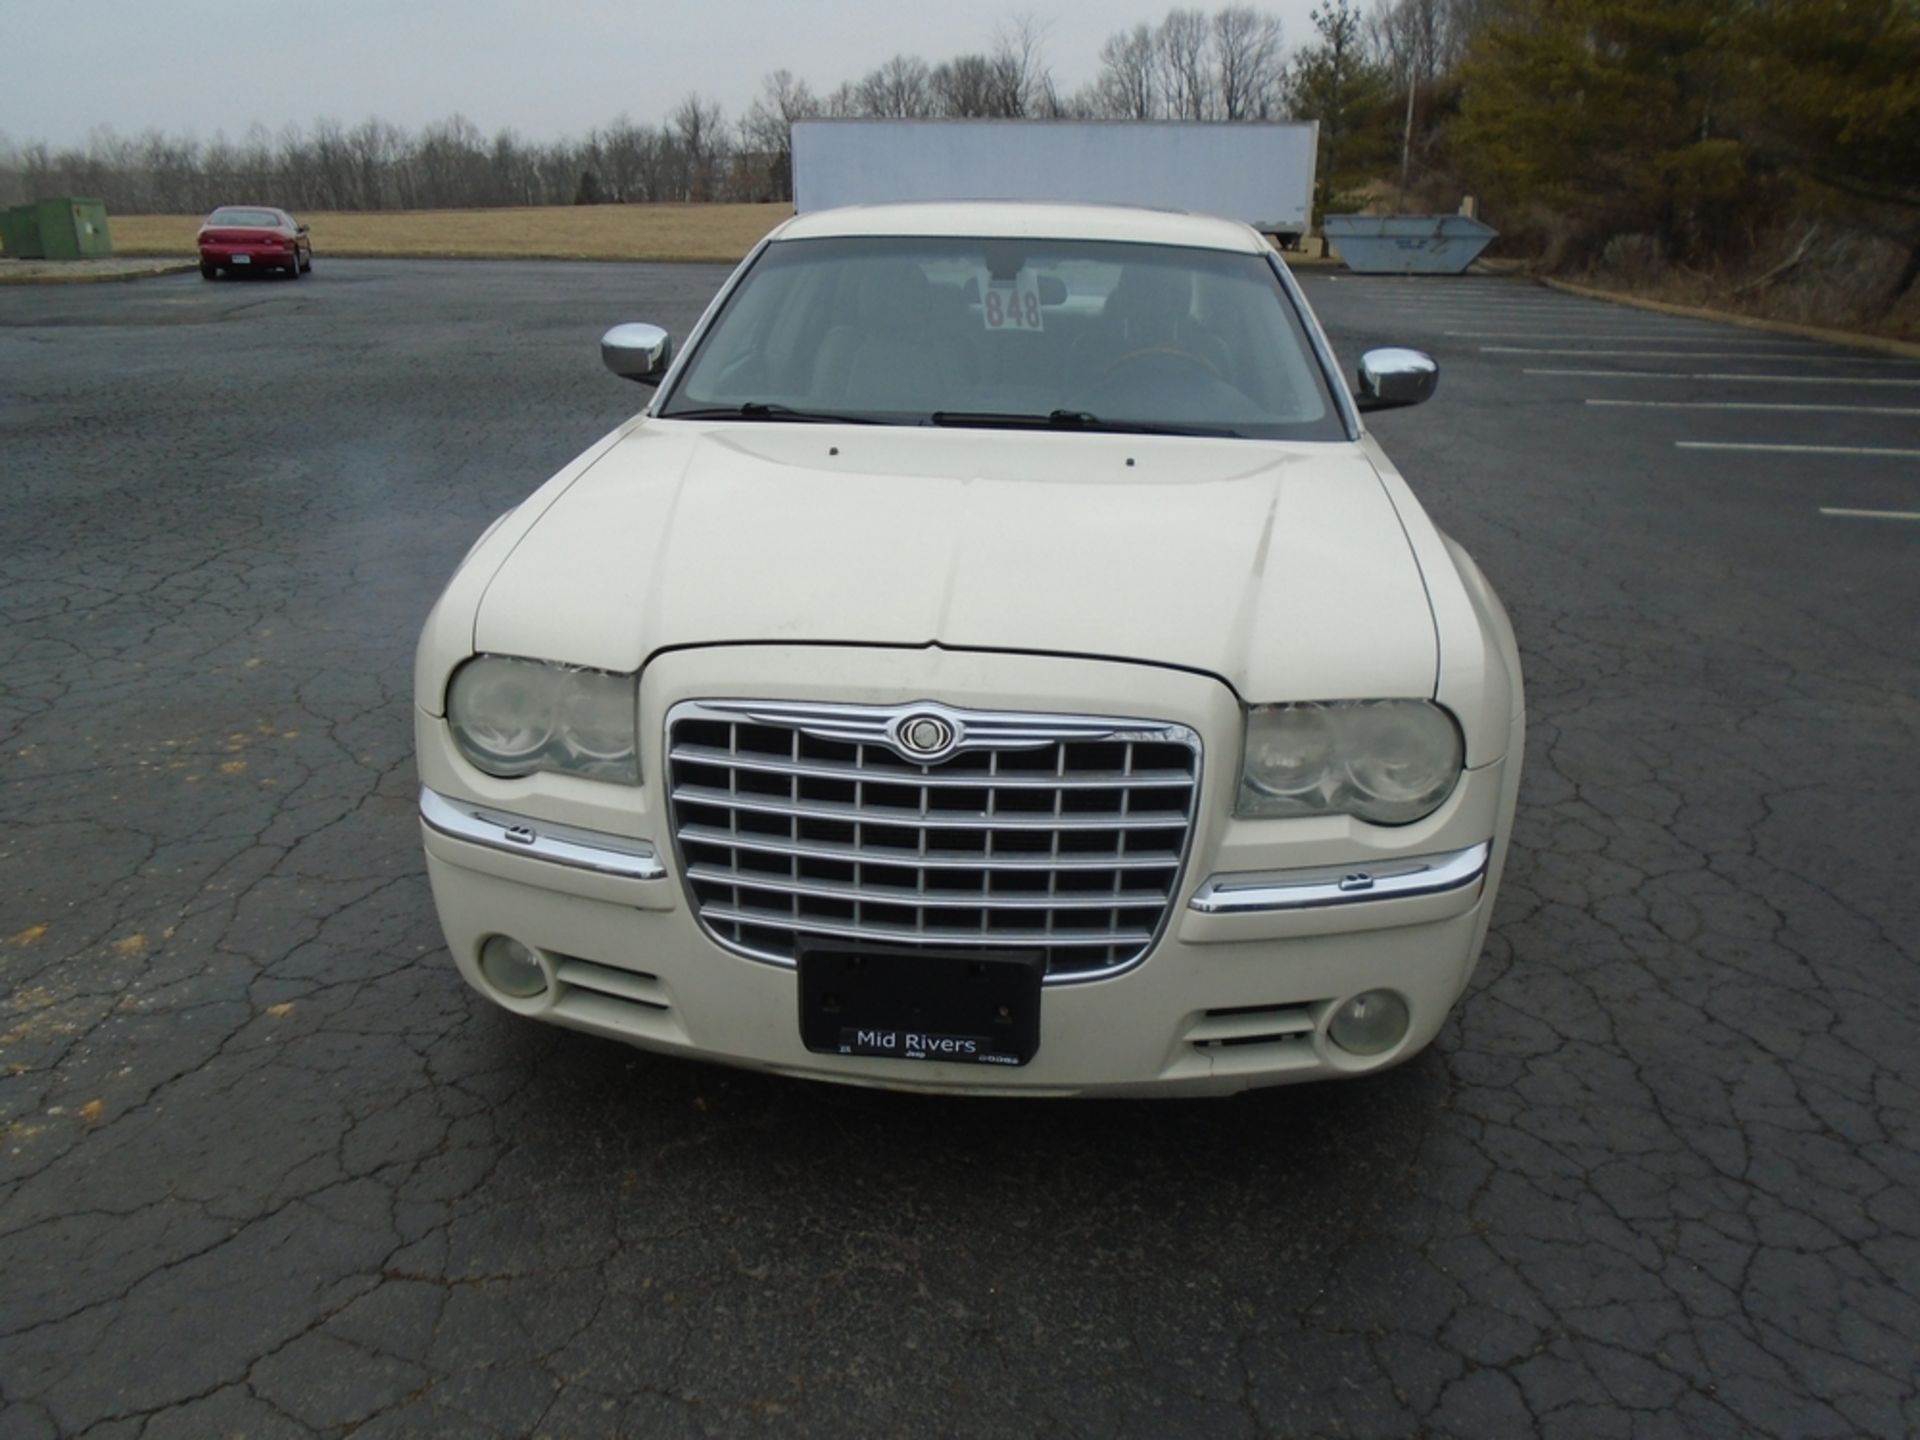 2005 Chrysler 300C Leather Interior Brand New Tires Full Spare Tire AC, Navigation, Blue Tooth - Image 2 of 13